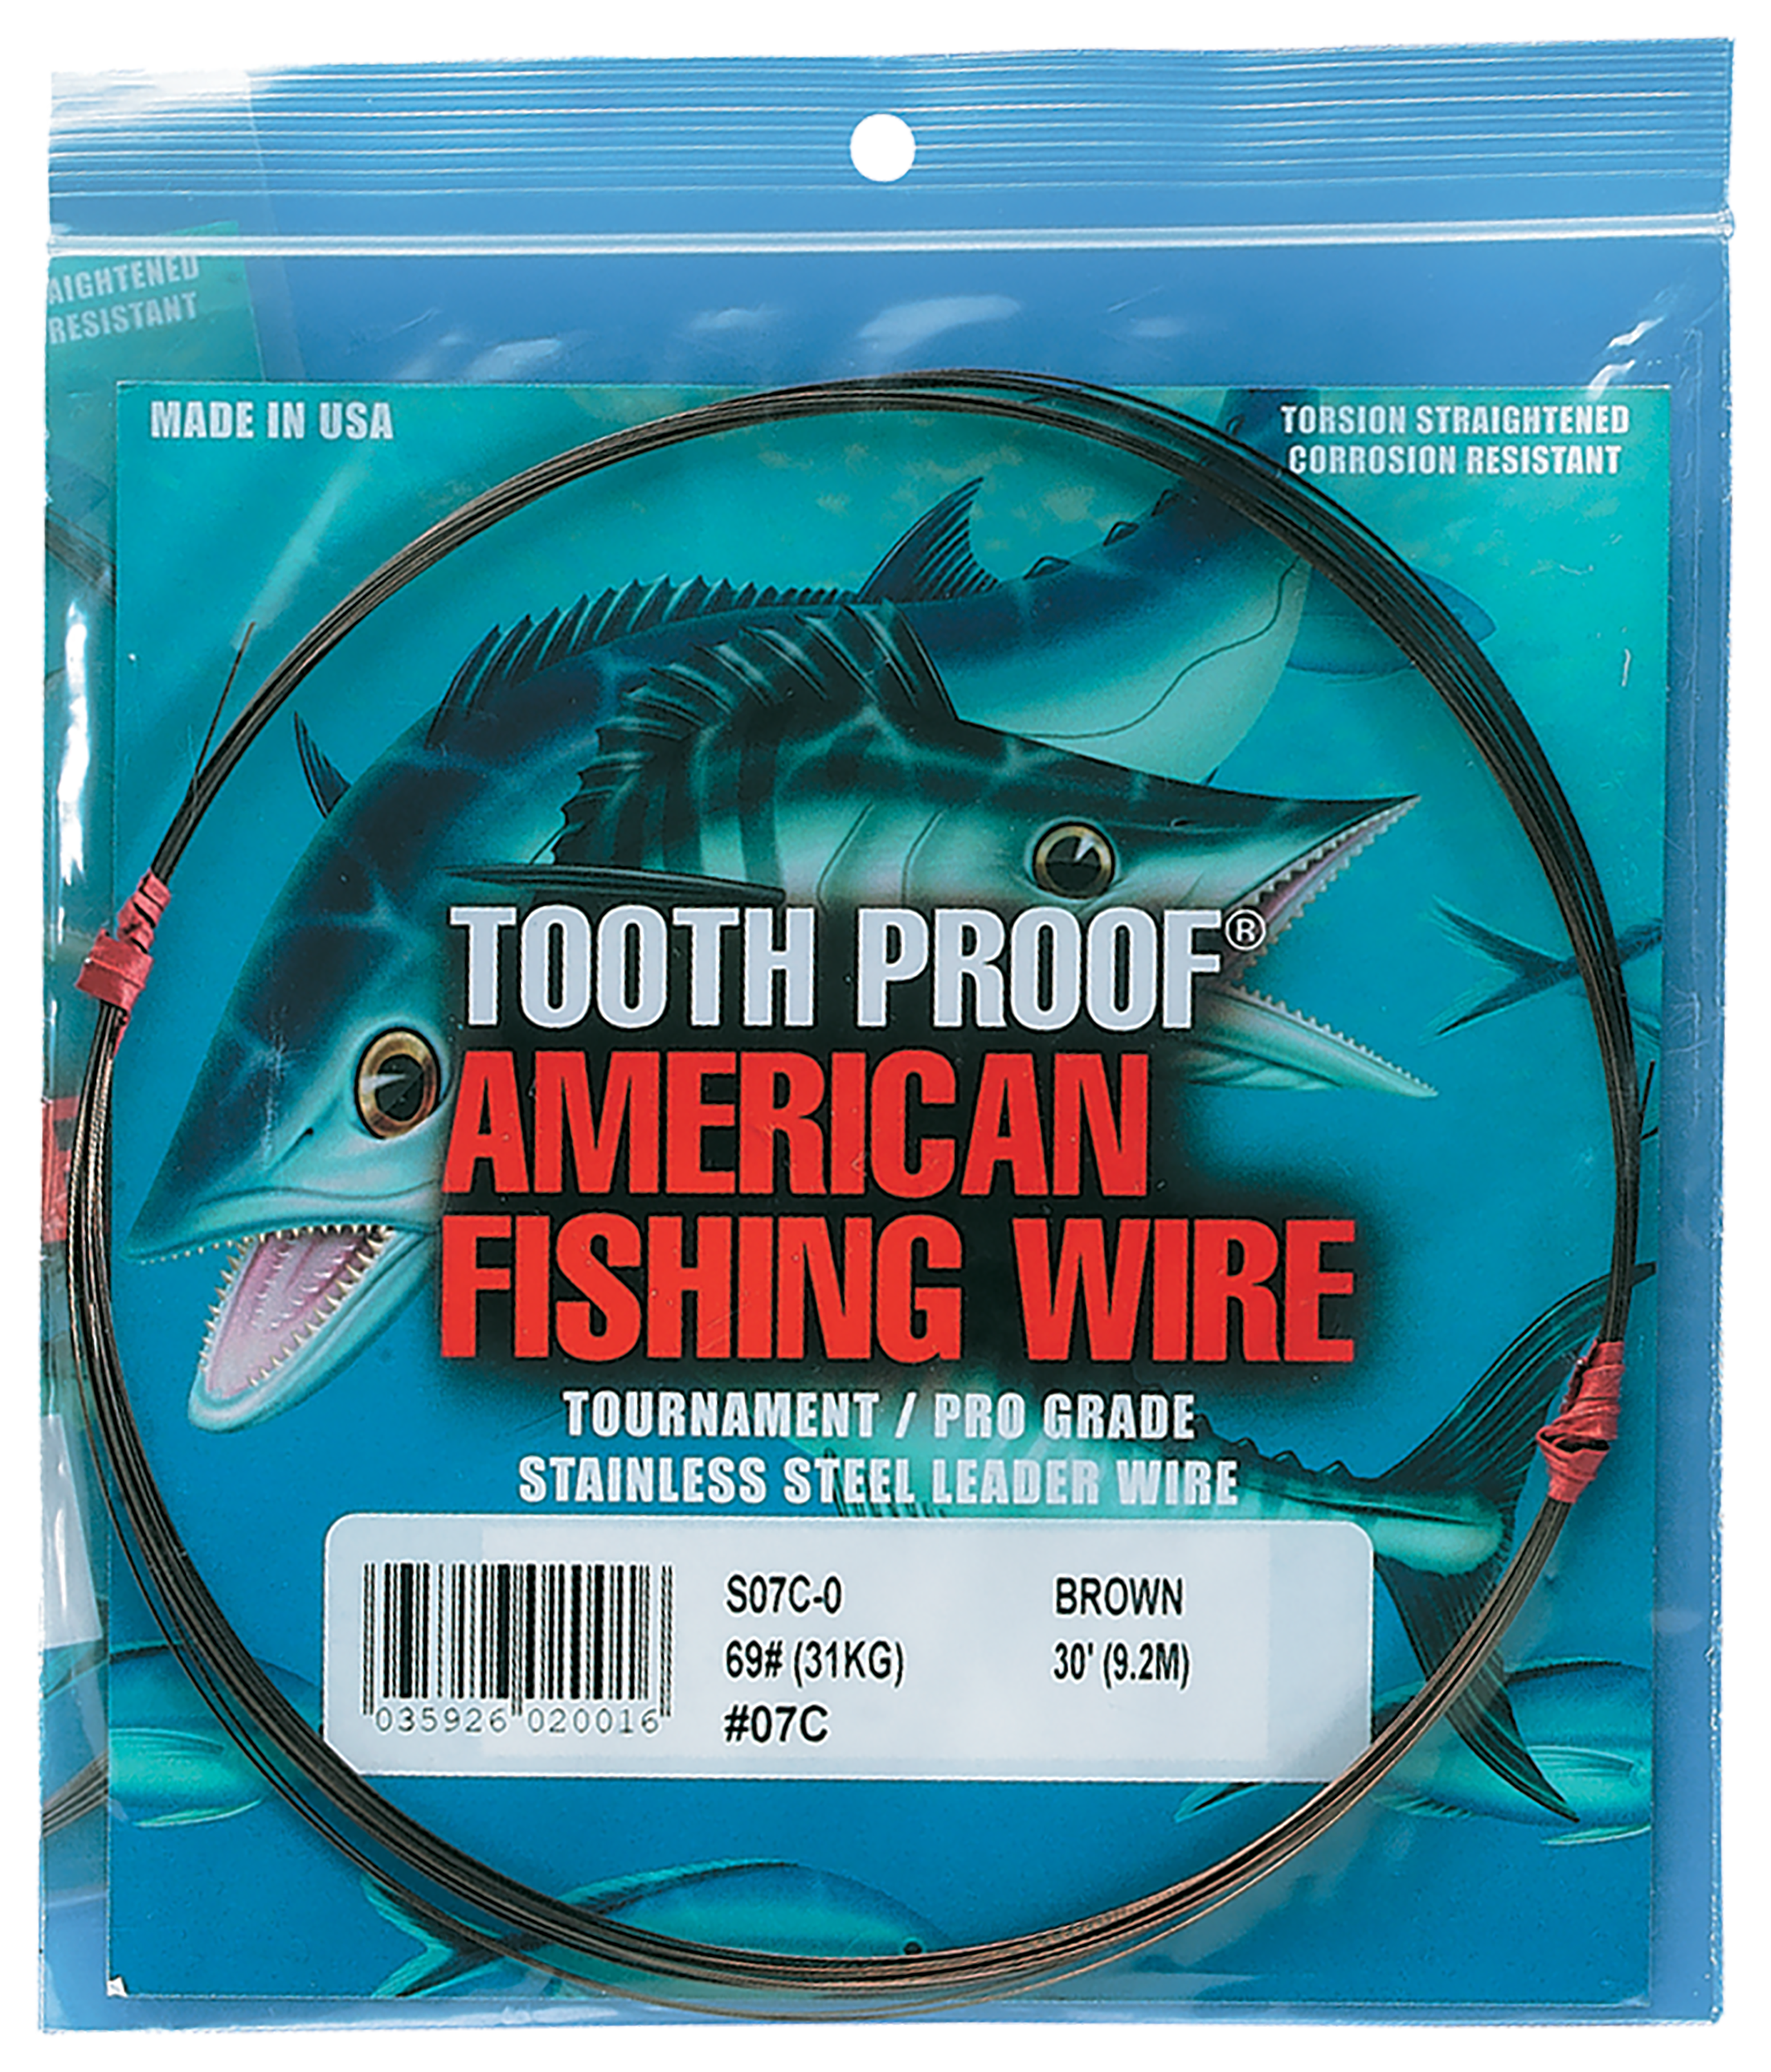 American Fishing Wire Stainless Steel Single-Strand Toothproof Leader Wire - 100'  -  69 lb. - Brown Camo